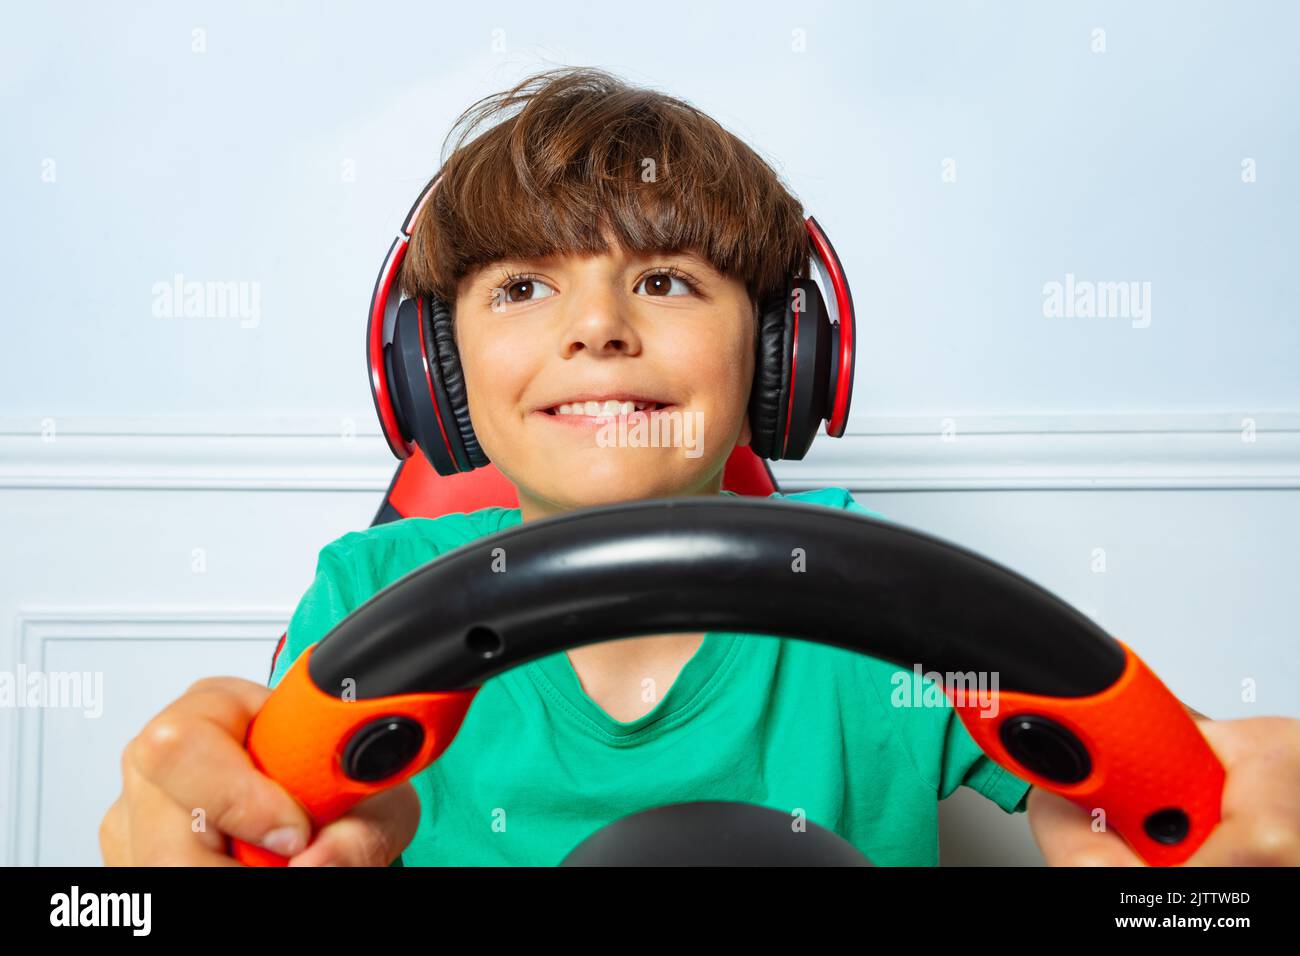 Smiling happy gamer boy with steering wheel play race game Stock Photo